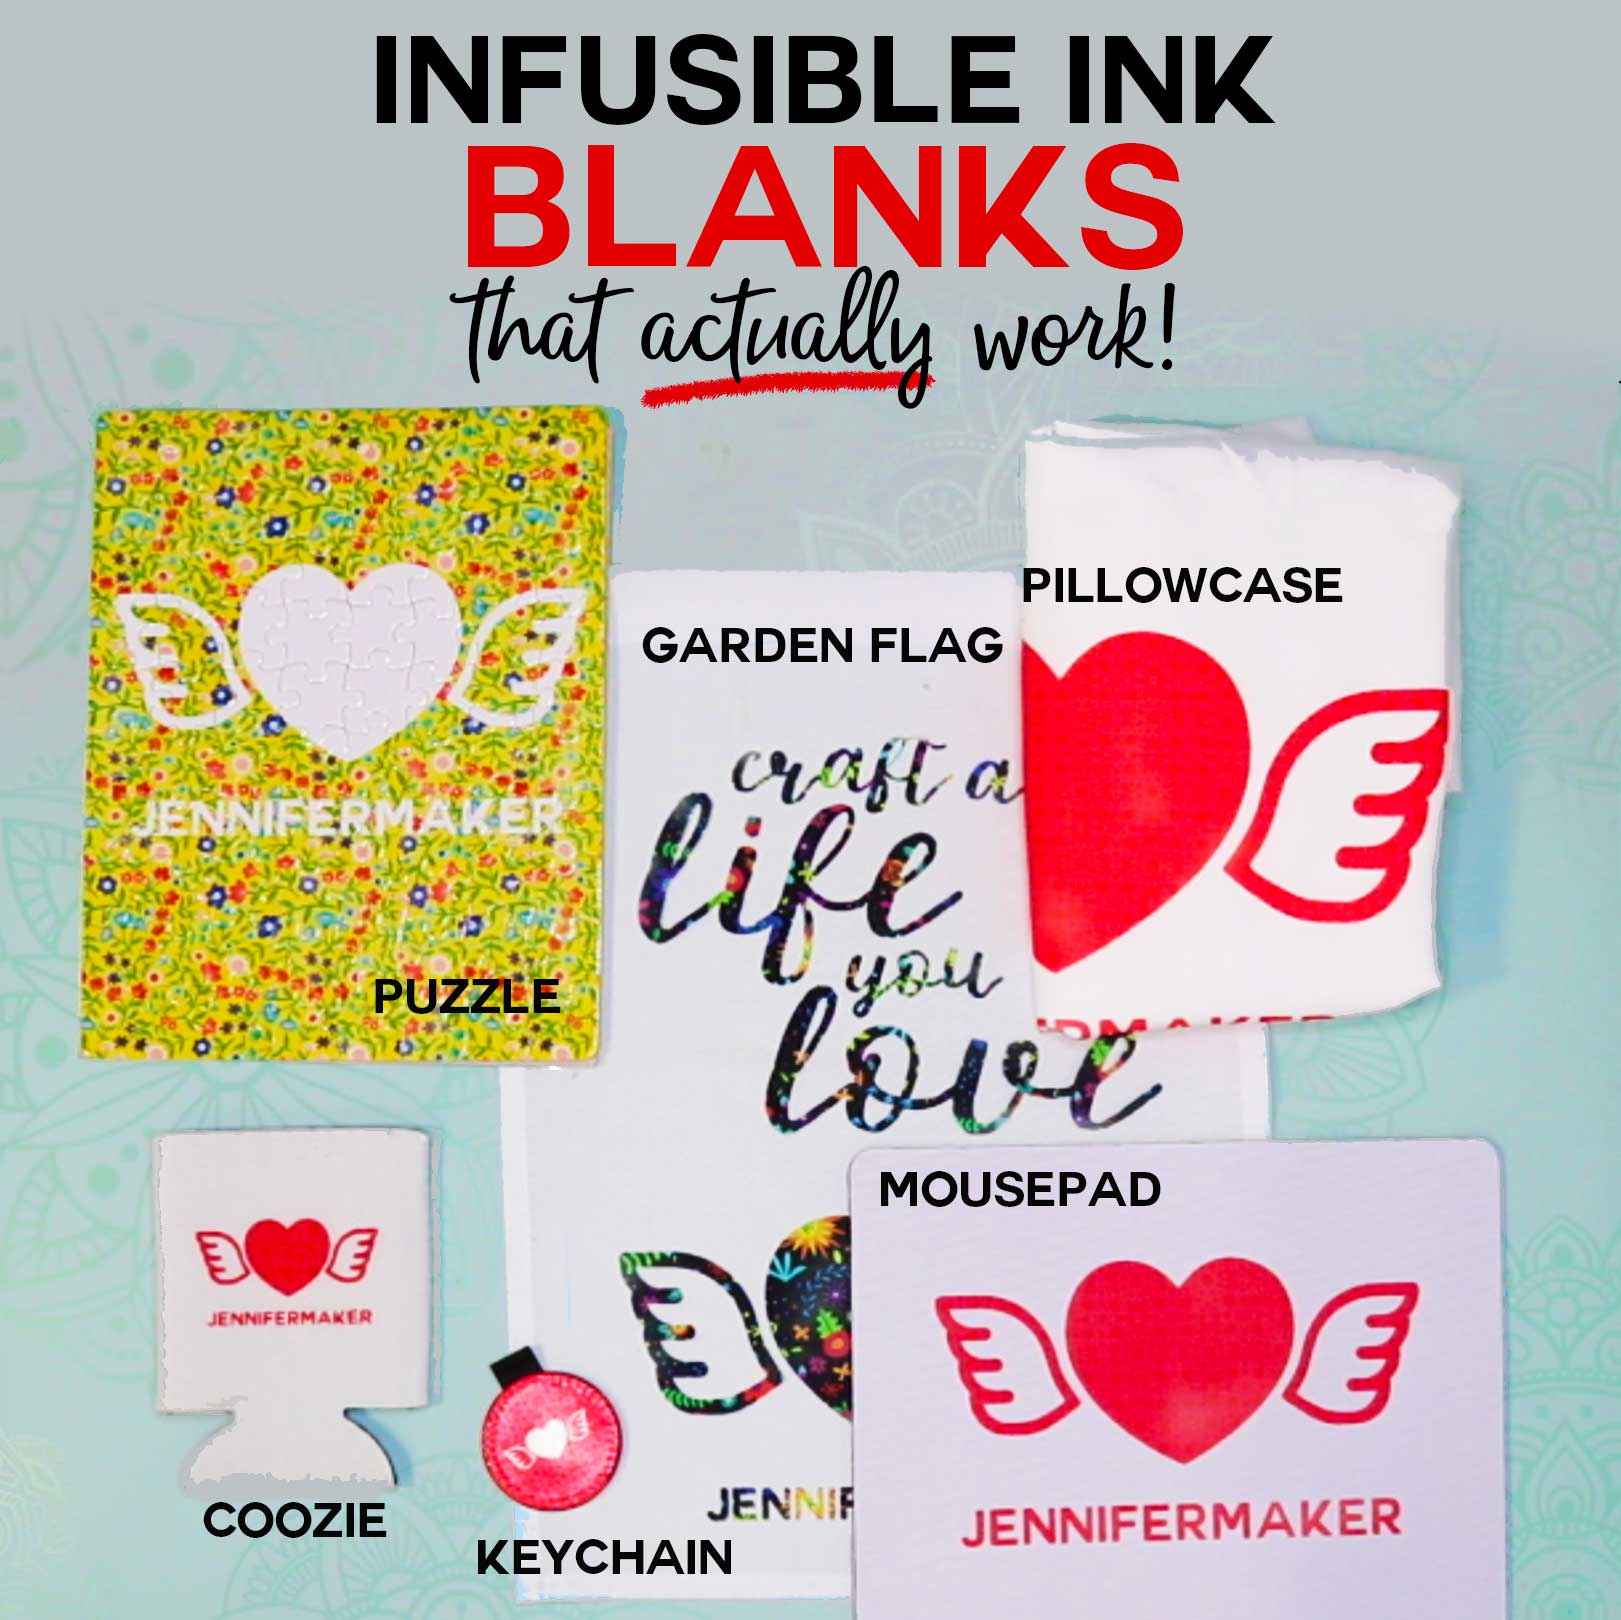 Cricut Infusible Ink Blanks & Materials that actually work! - List of What You Can Put Infusible Inks On #cricut #infusibleink #easypress